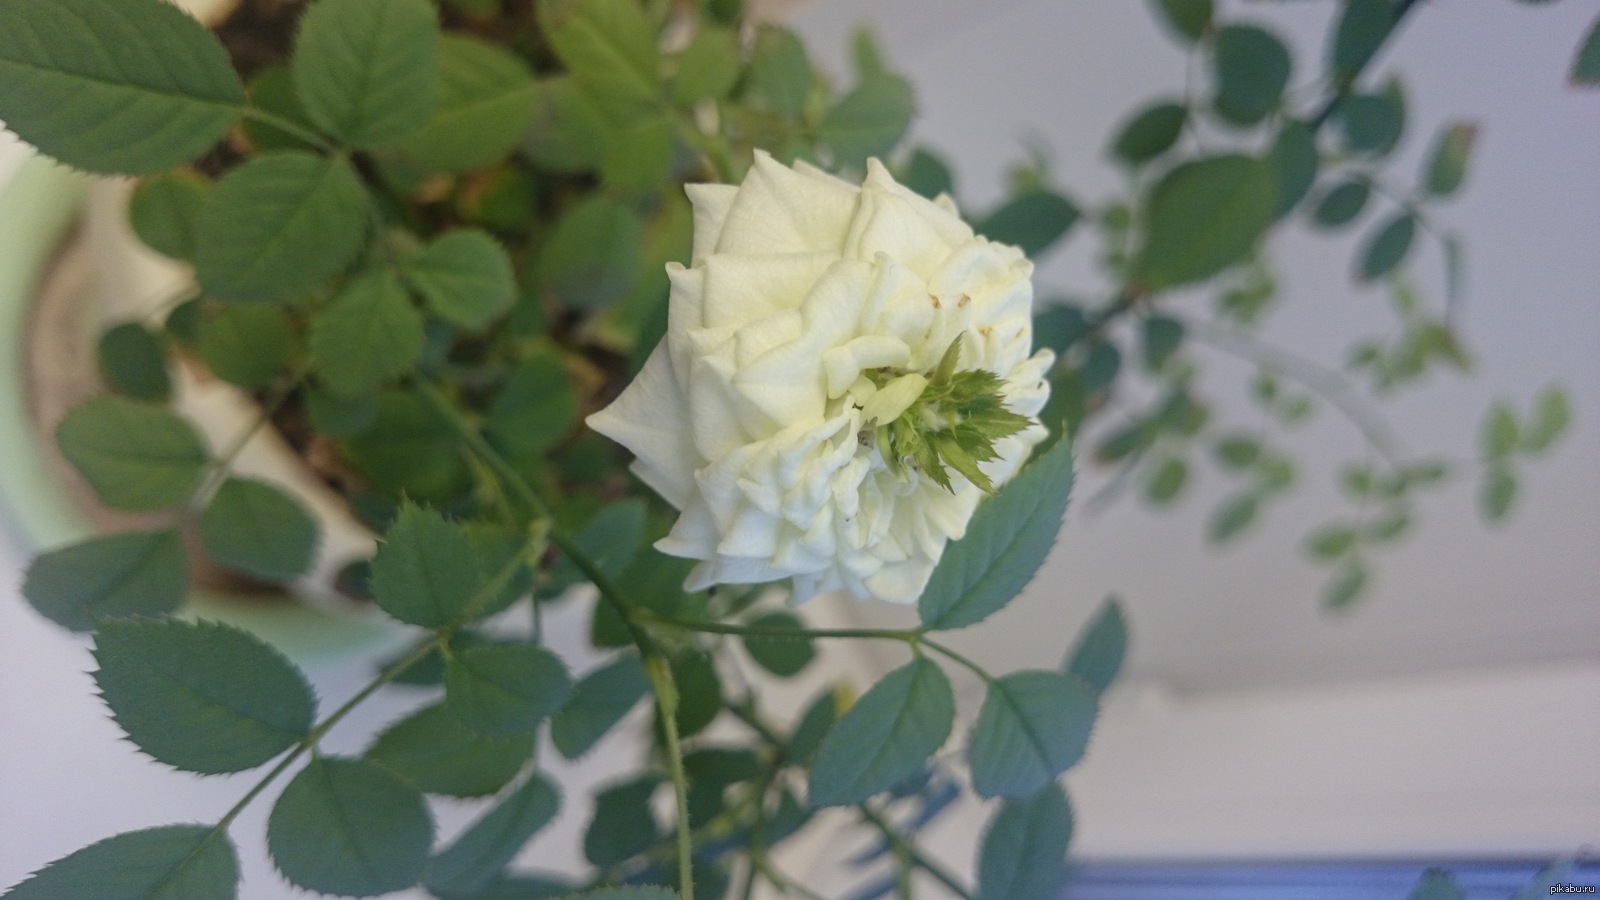 My spray rose forgot how to bloom. - Mutant, Houseplants, Flower, Flowers, the Rose, My